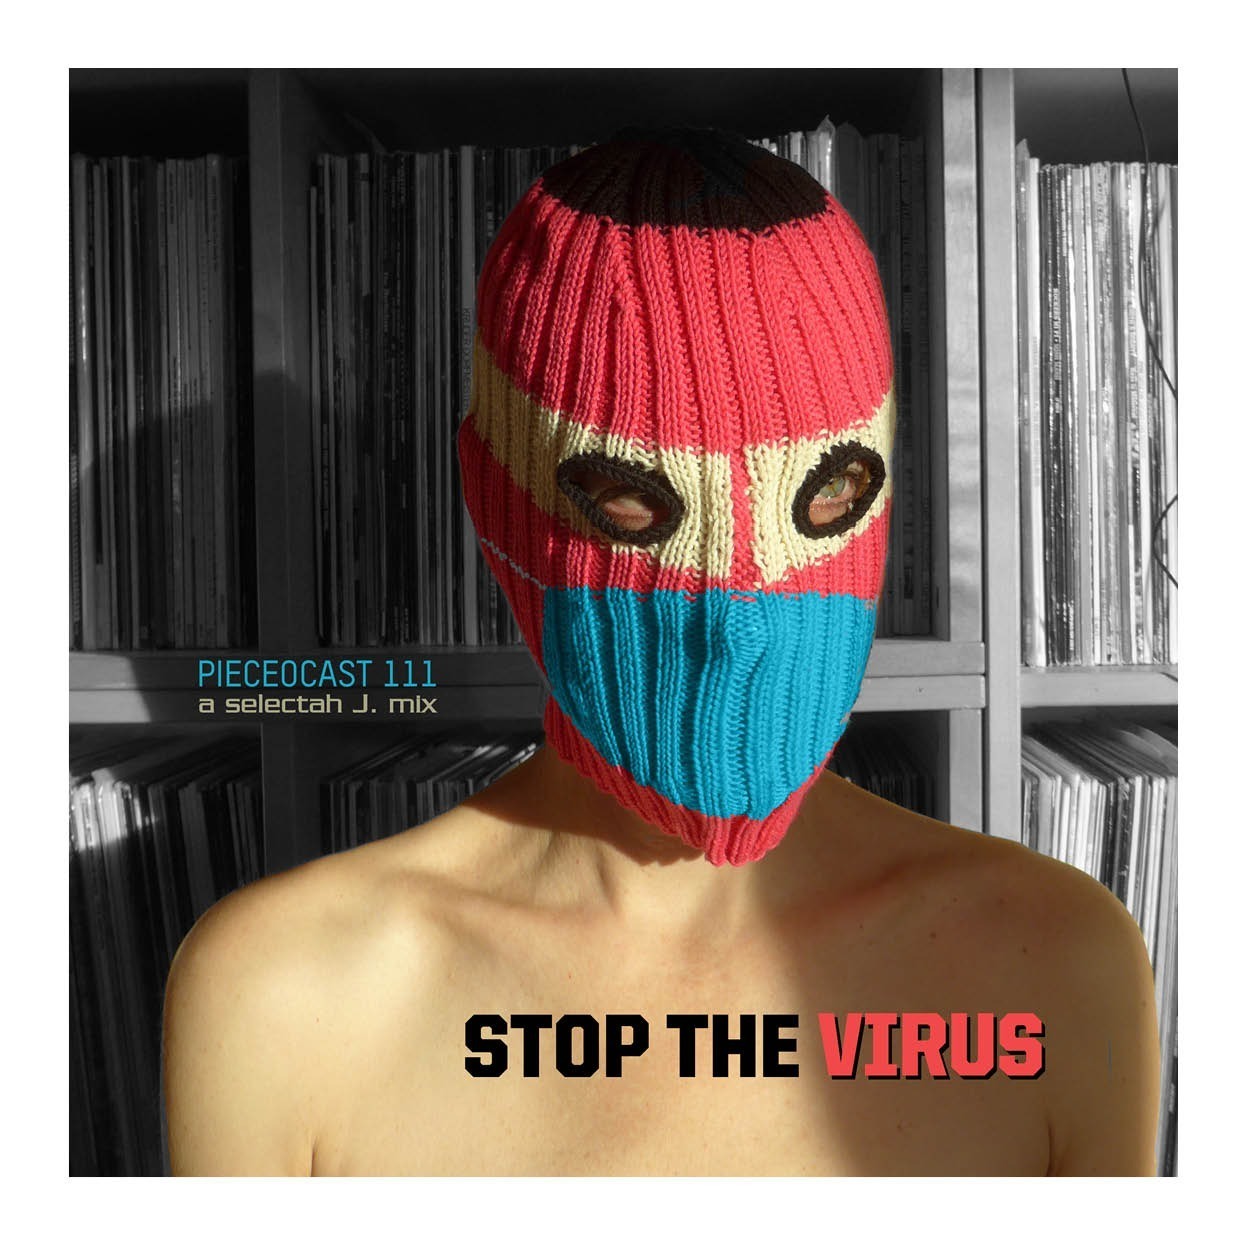 Cover art for Pieceocast 111 entitled Stop The Virus shows a woman wearing a balaclava with a knitted mask